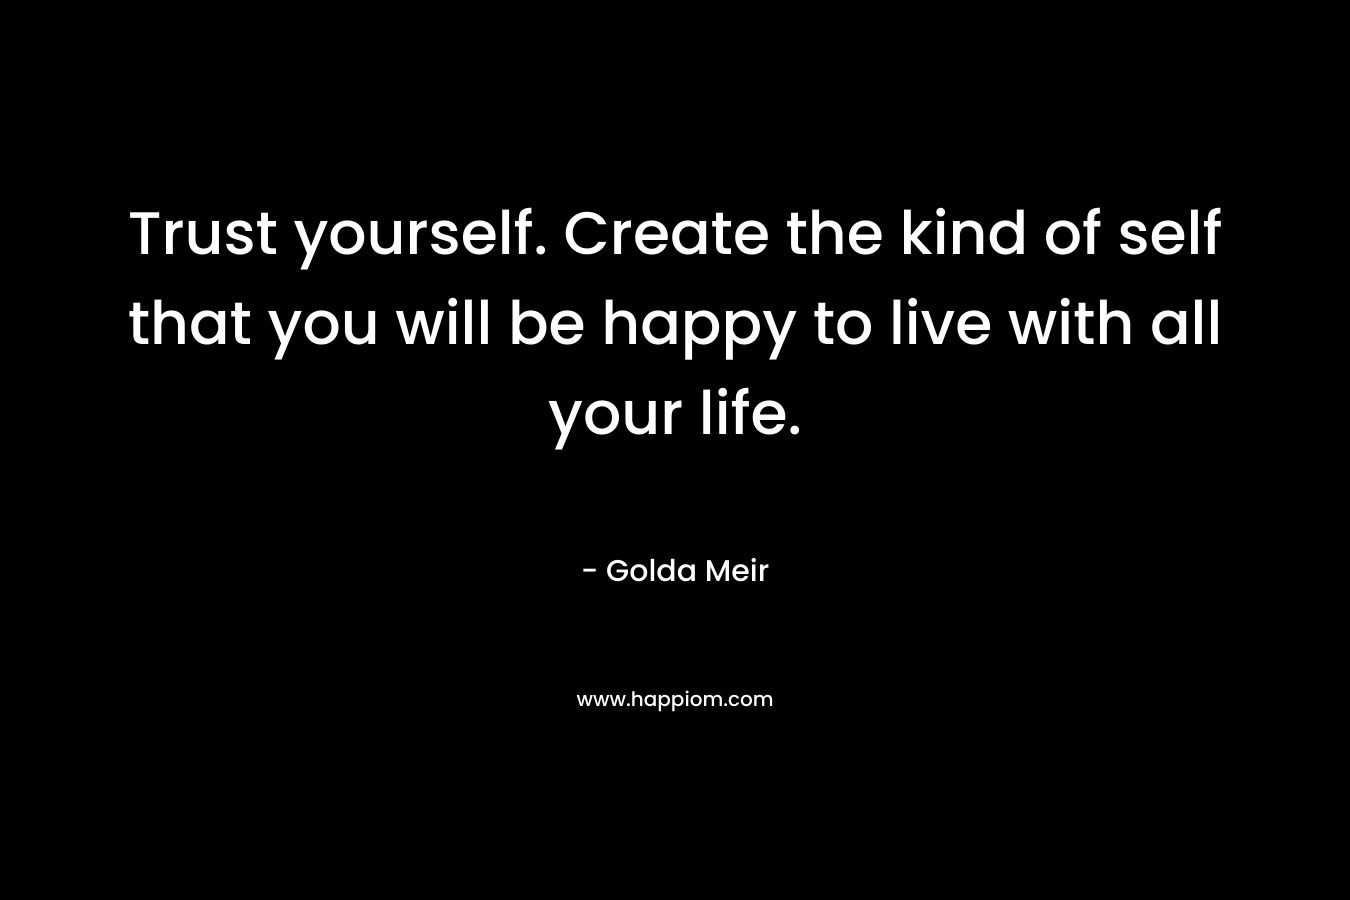 Trust yourself. Create the kind of self that you will be happy to live with all your life.